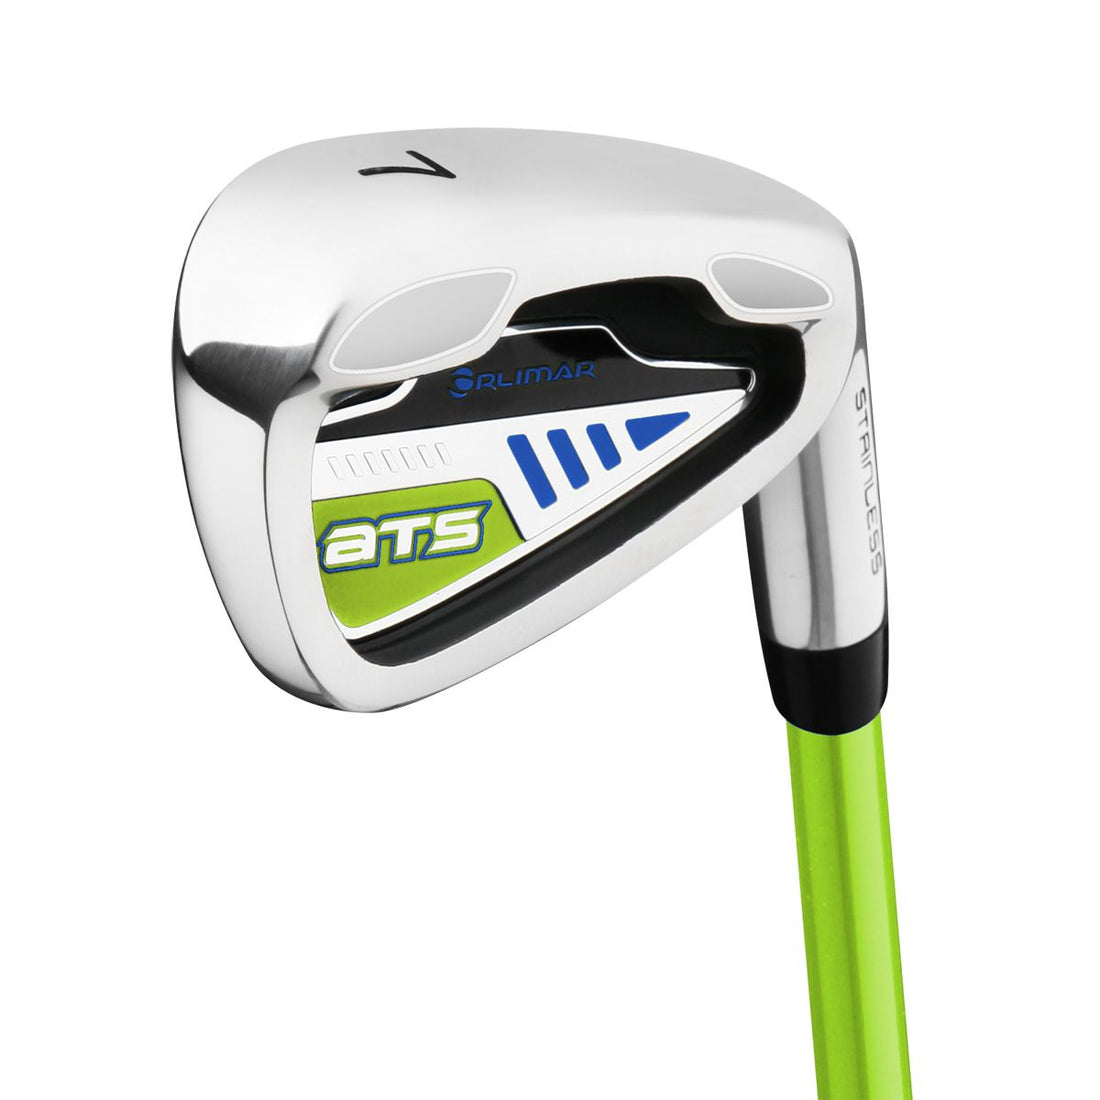 angled cavity back view of an Orlimar ATS Junior Lime/Blue Series 7 iron